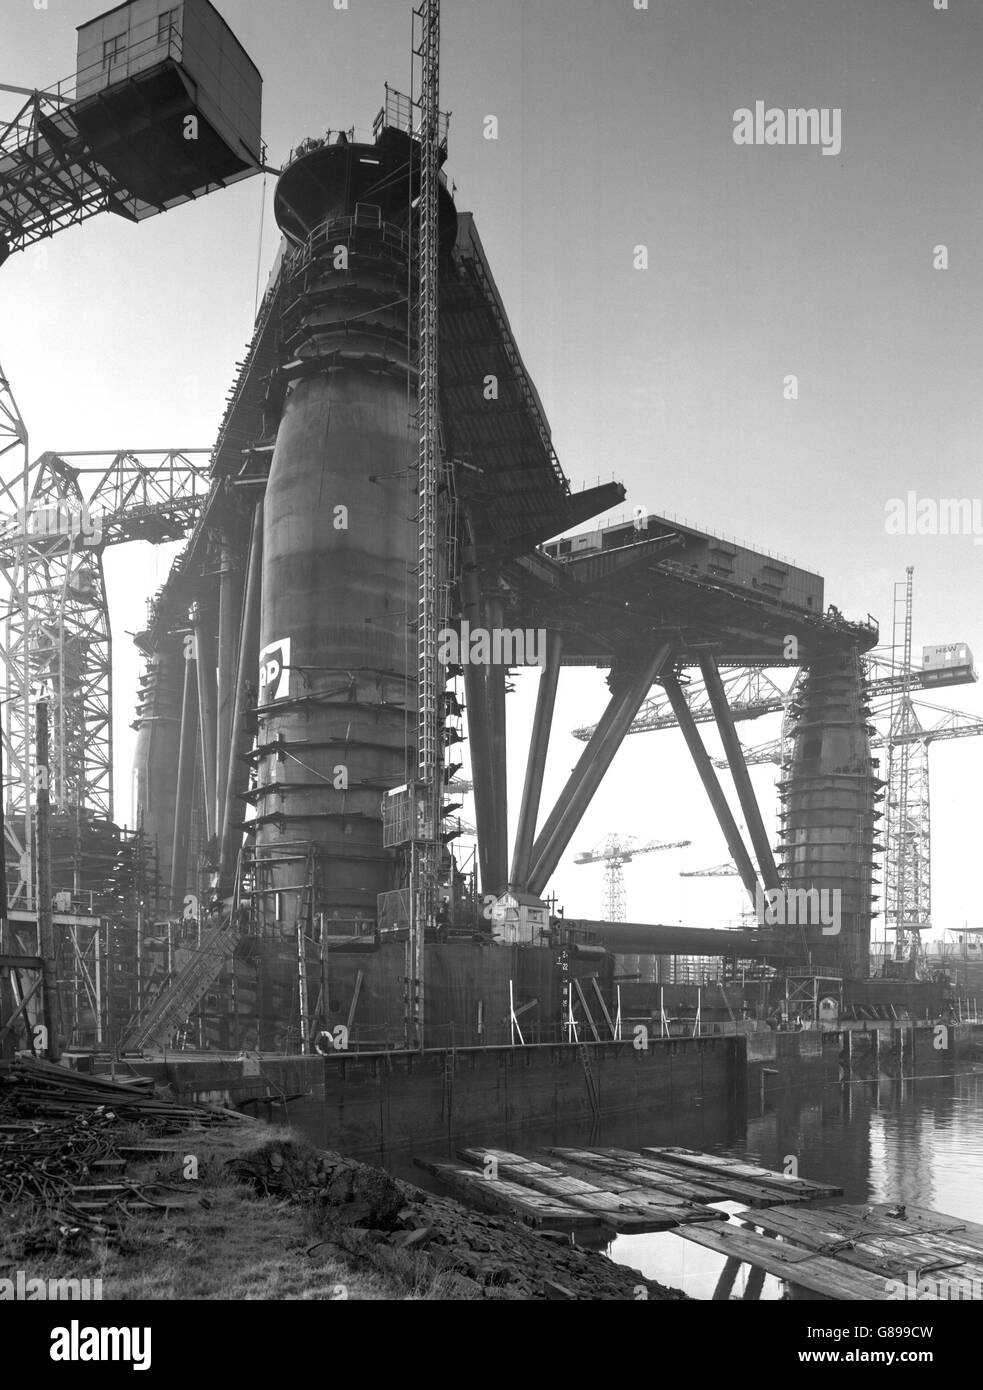 3.25million Sea Quest, the oil drilling platform being built for British Petroleum at the Harland and Wolff yards at Belfast. Sea Quest is the biggest oil rig ever to be built in Europe. Stock Photo